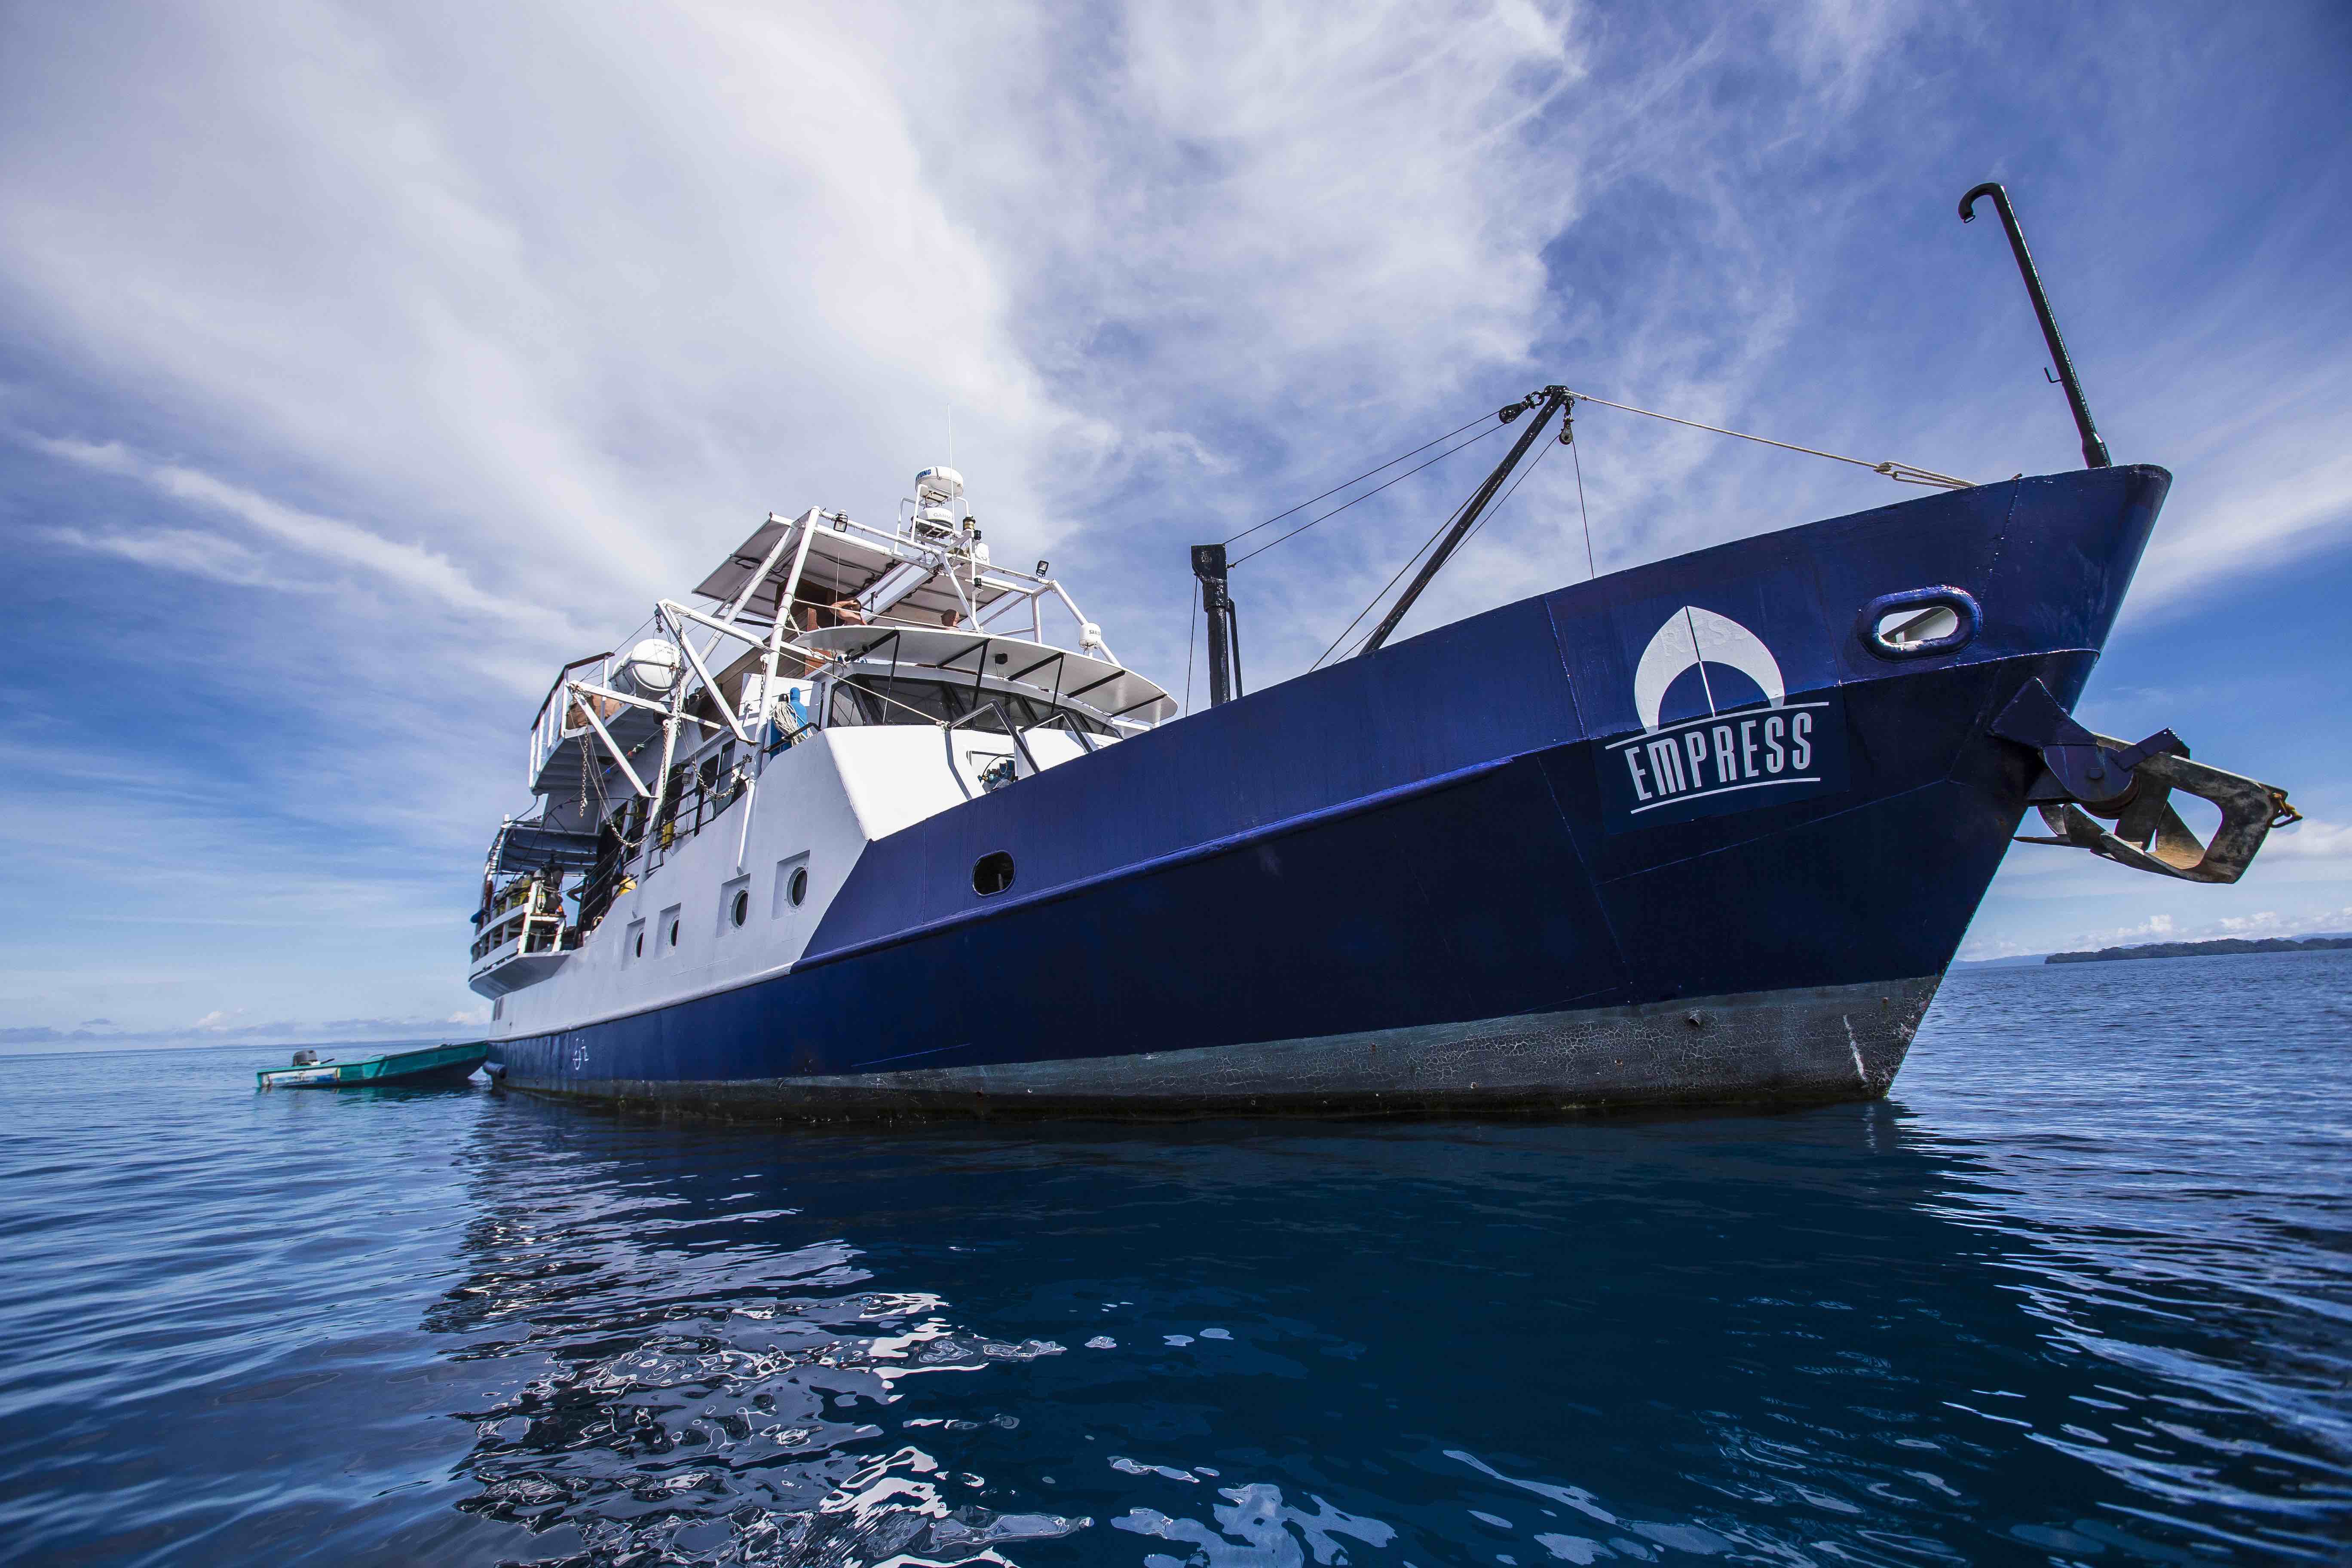 Dive Center For Sale - Successful Liveaboard Operating In Komodo And Raja Ampat For Sale / looking for Investor